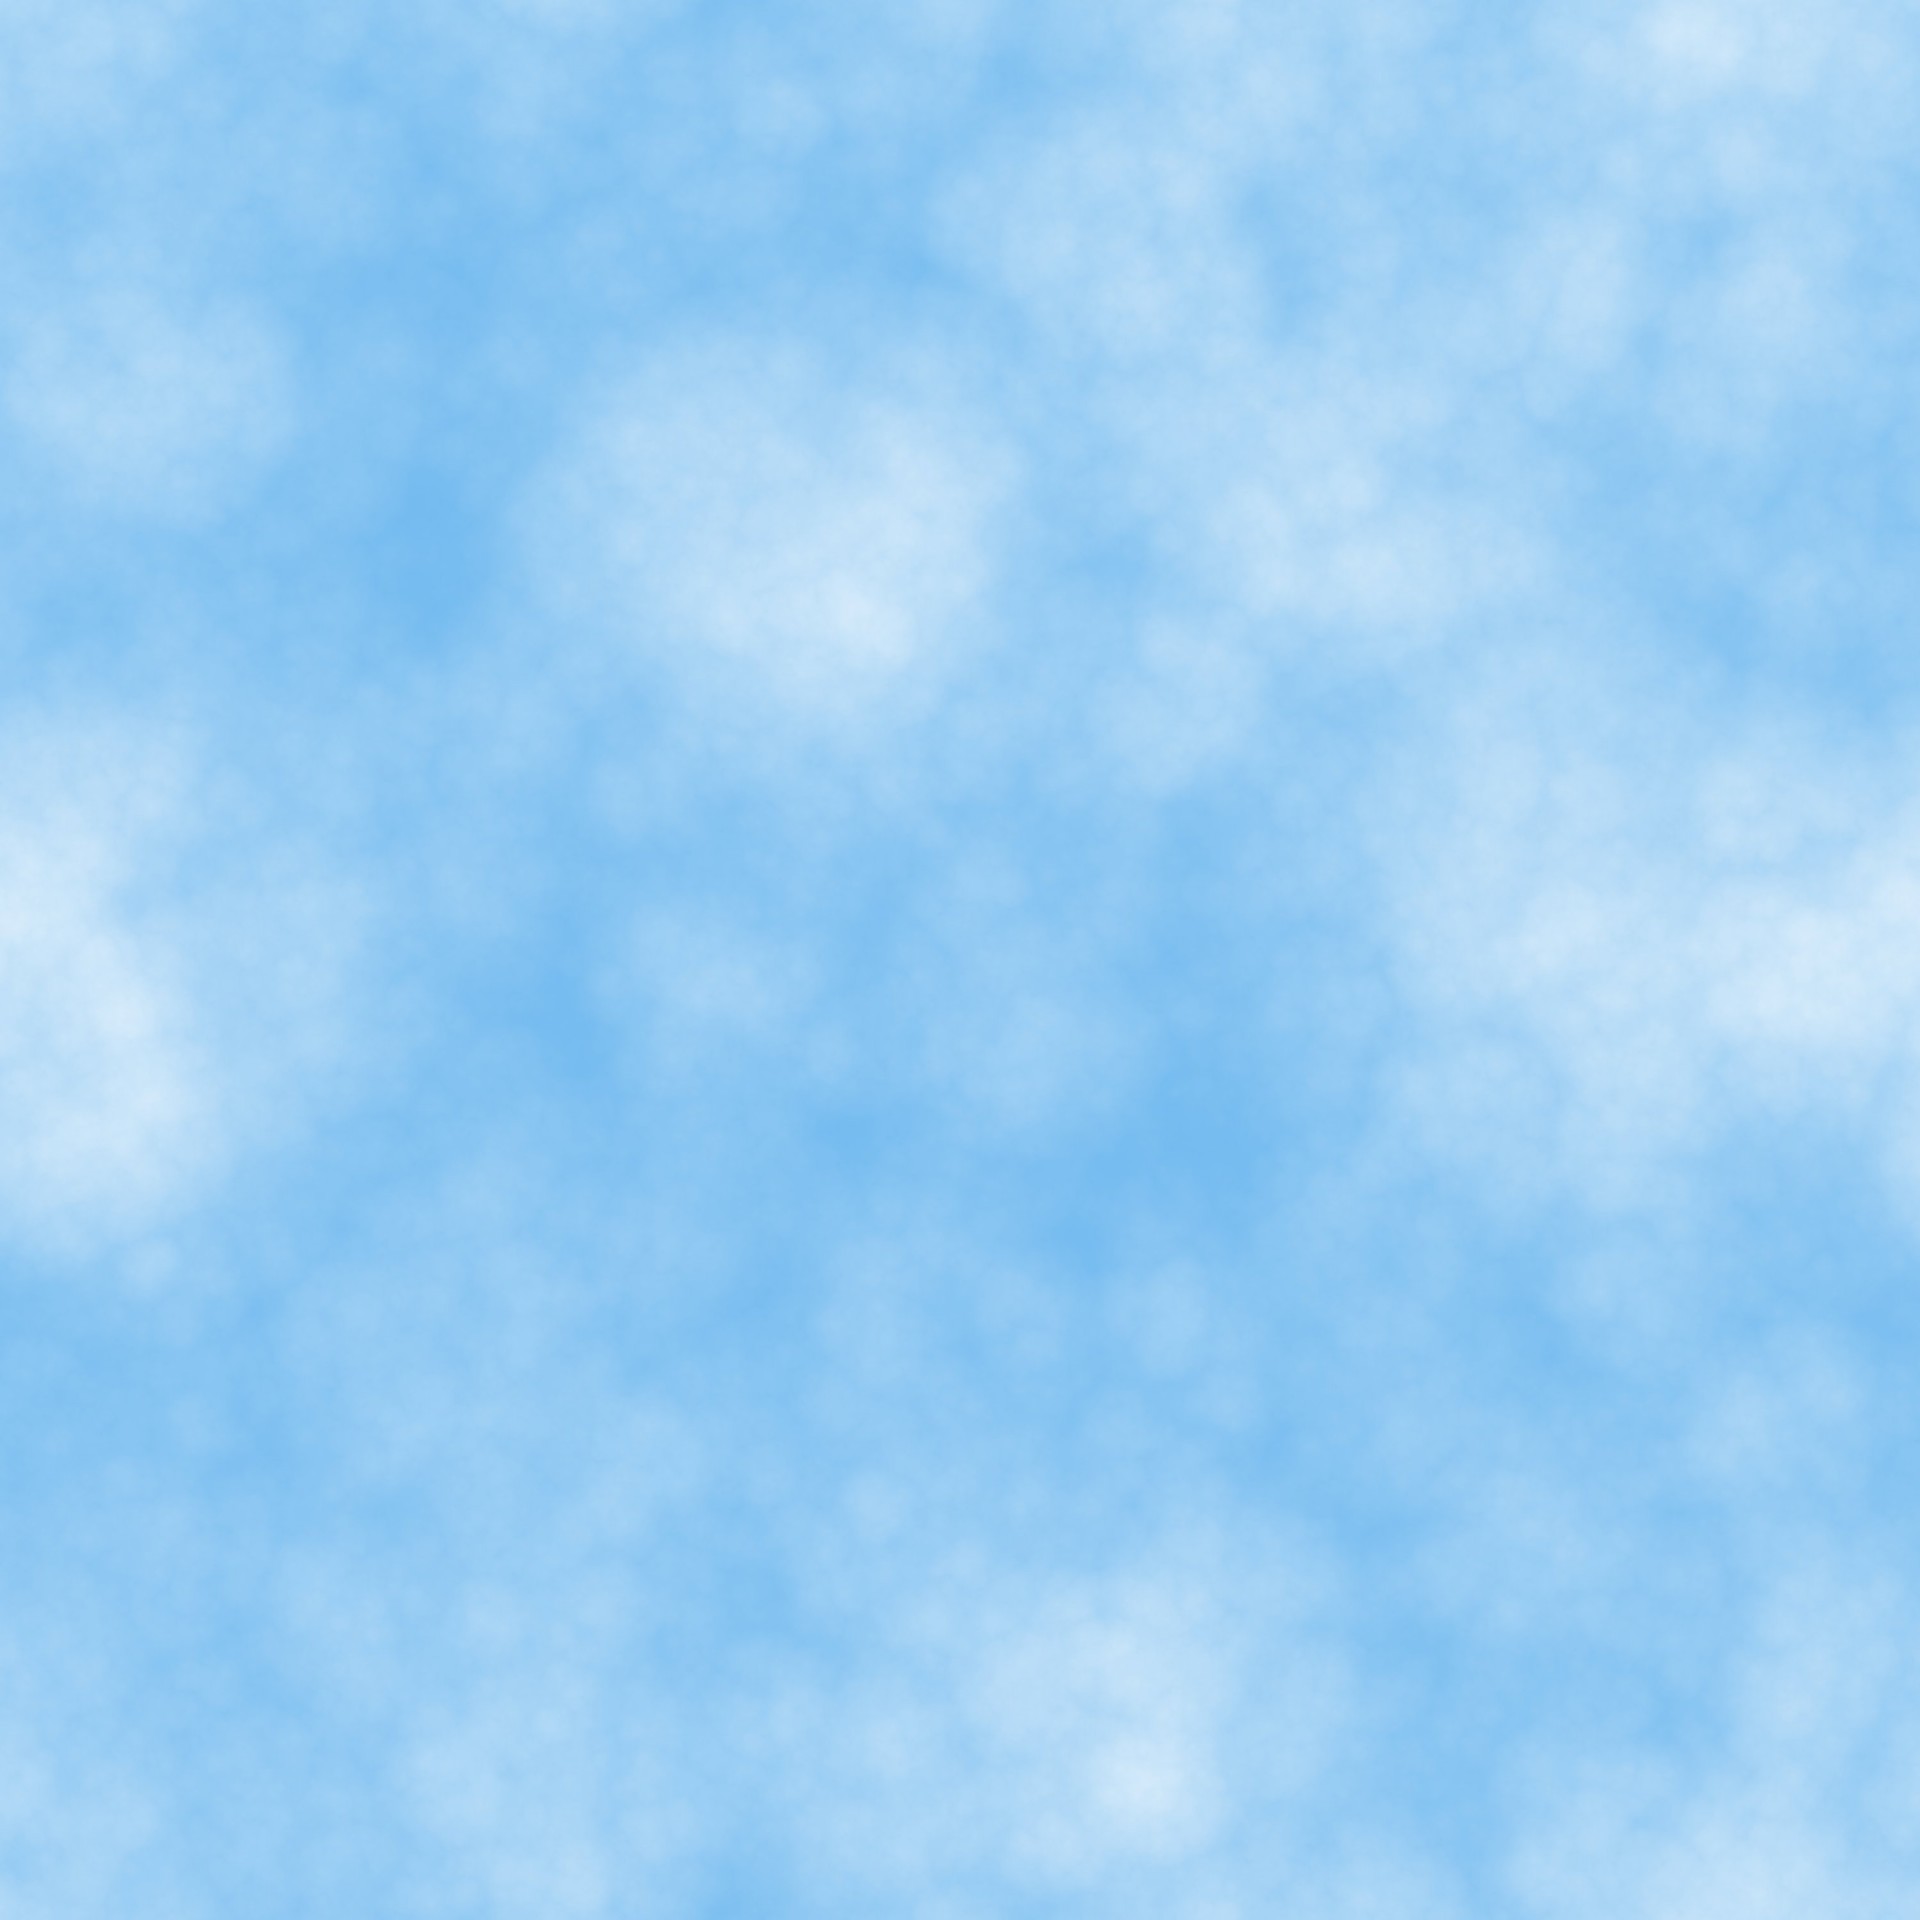 Download free photo of Blue,clouds,background,high,resolution - from  